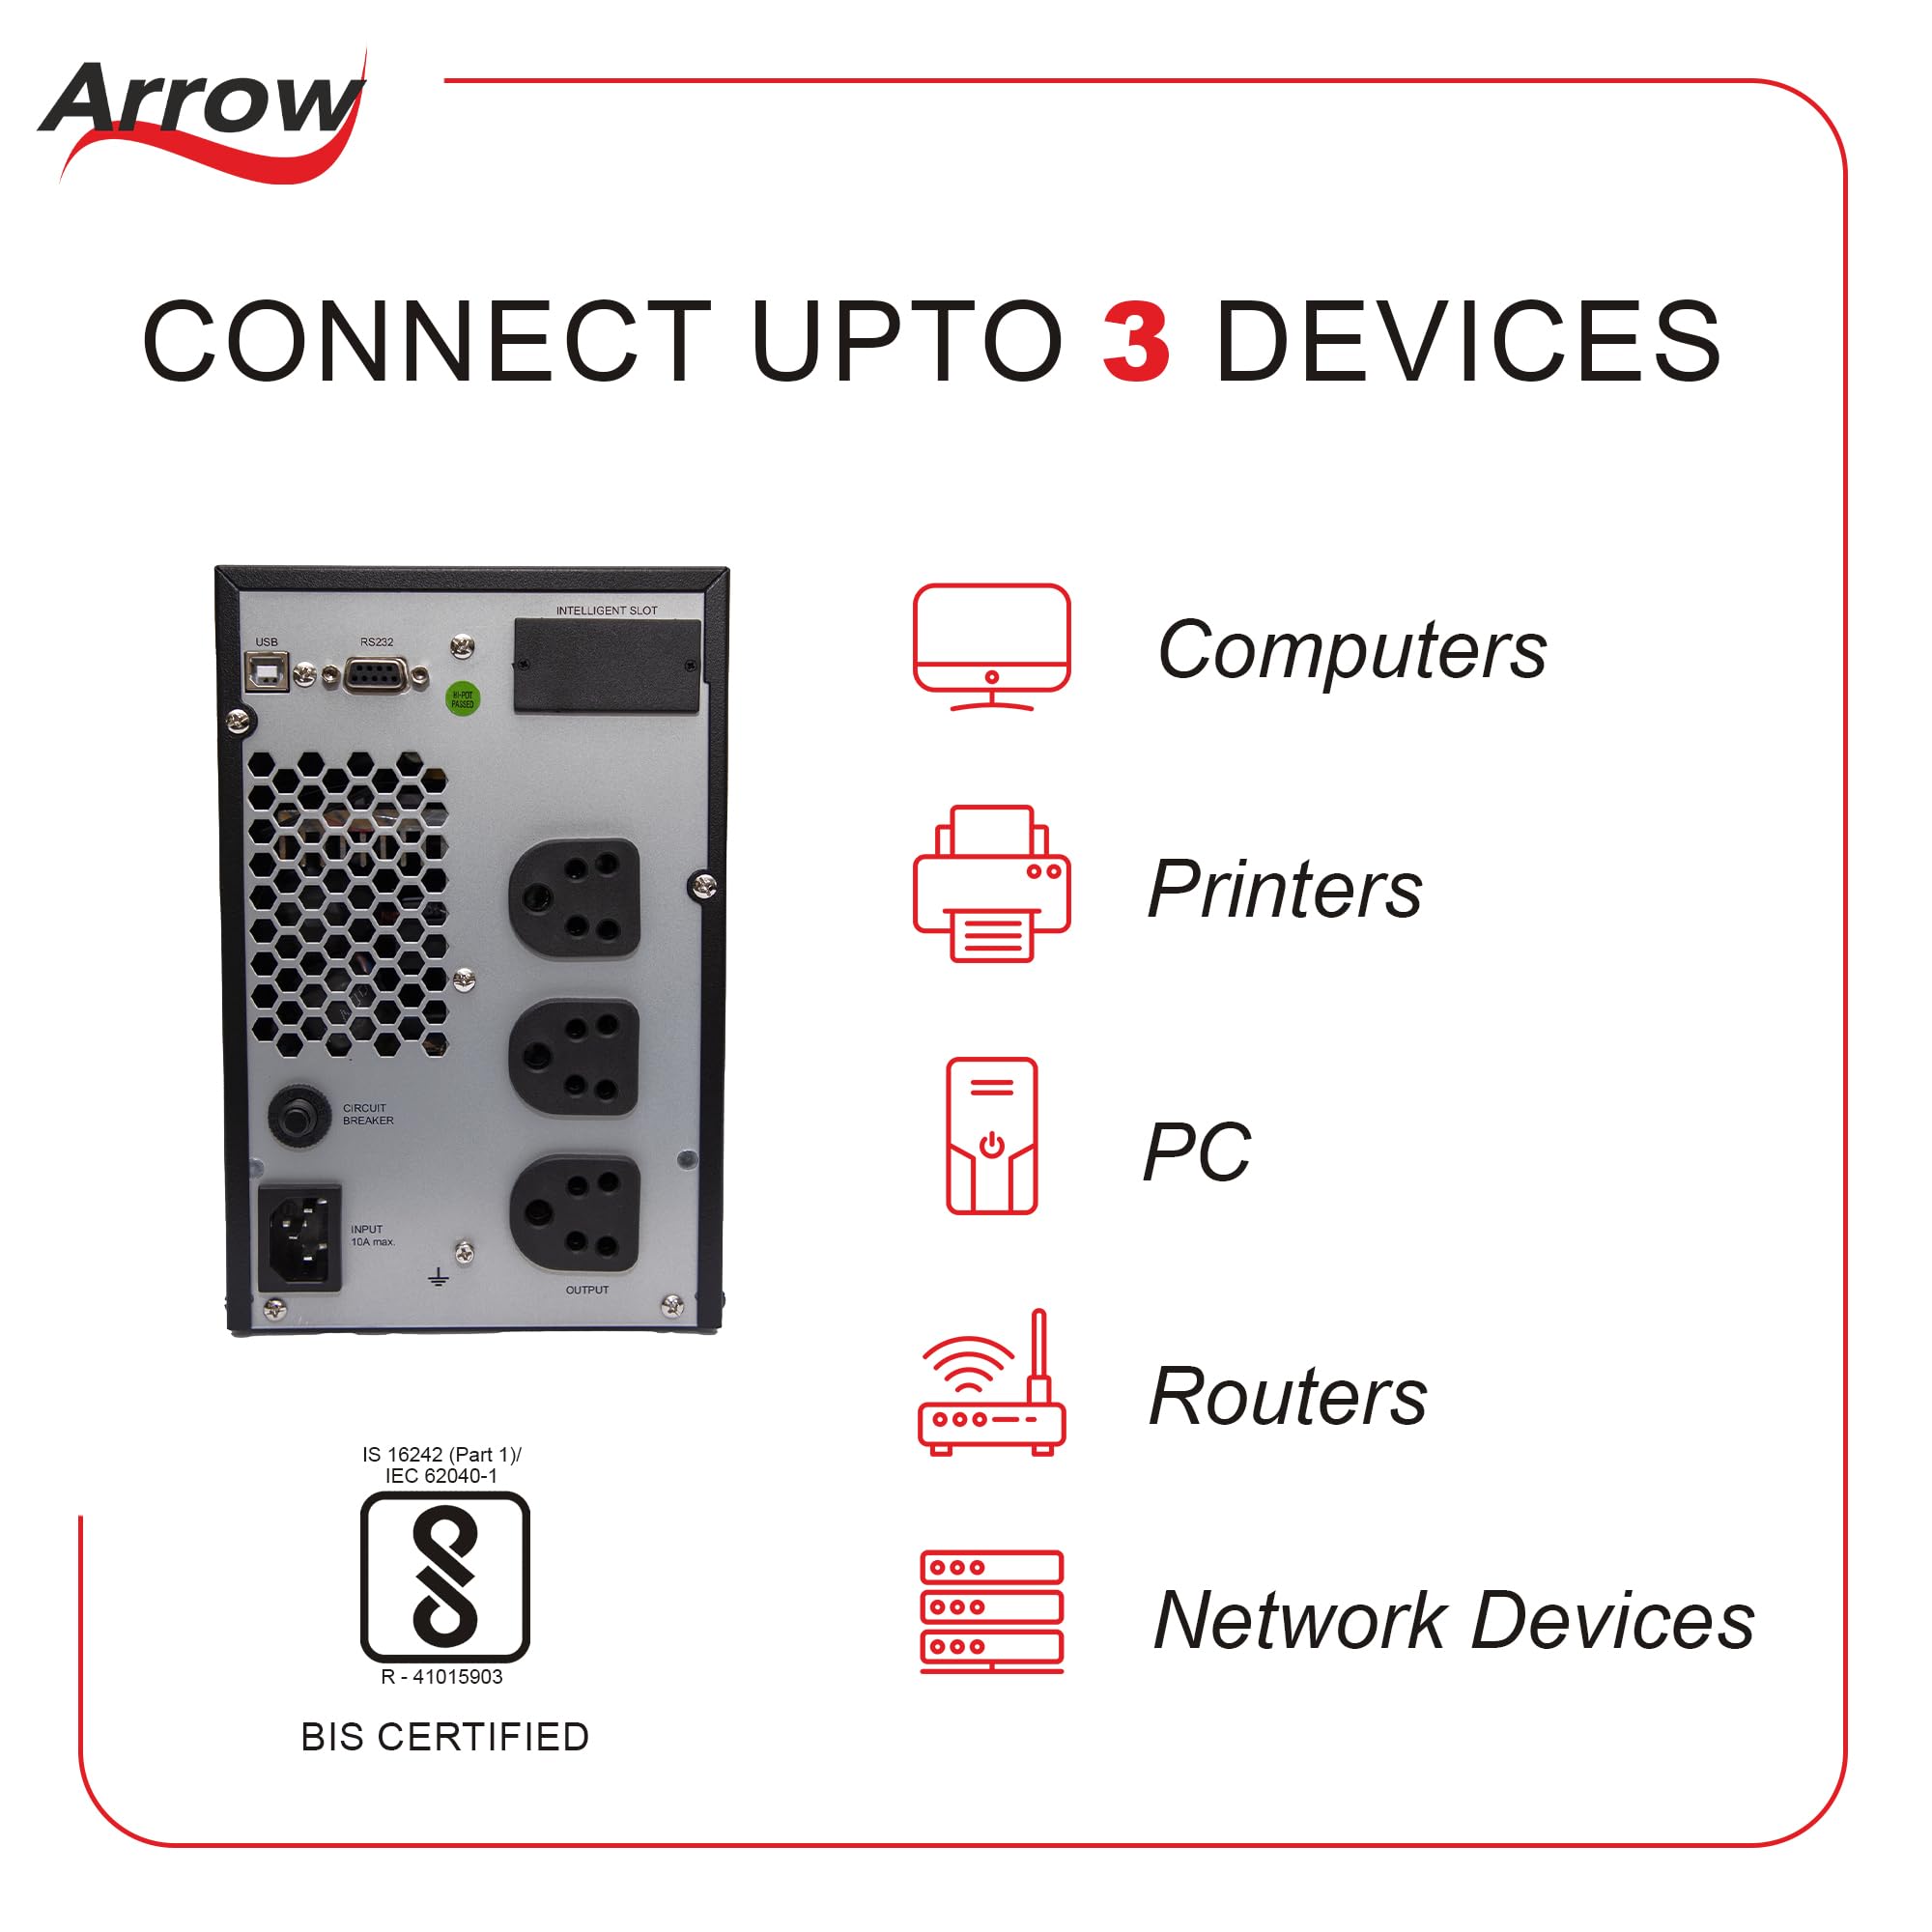 Devices connected by arrows or a network